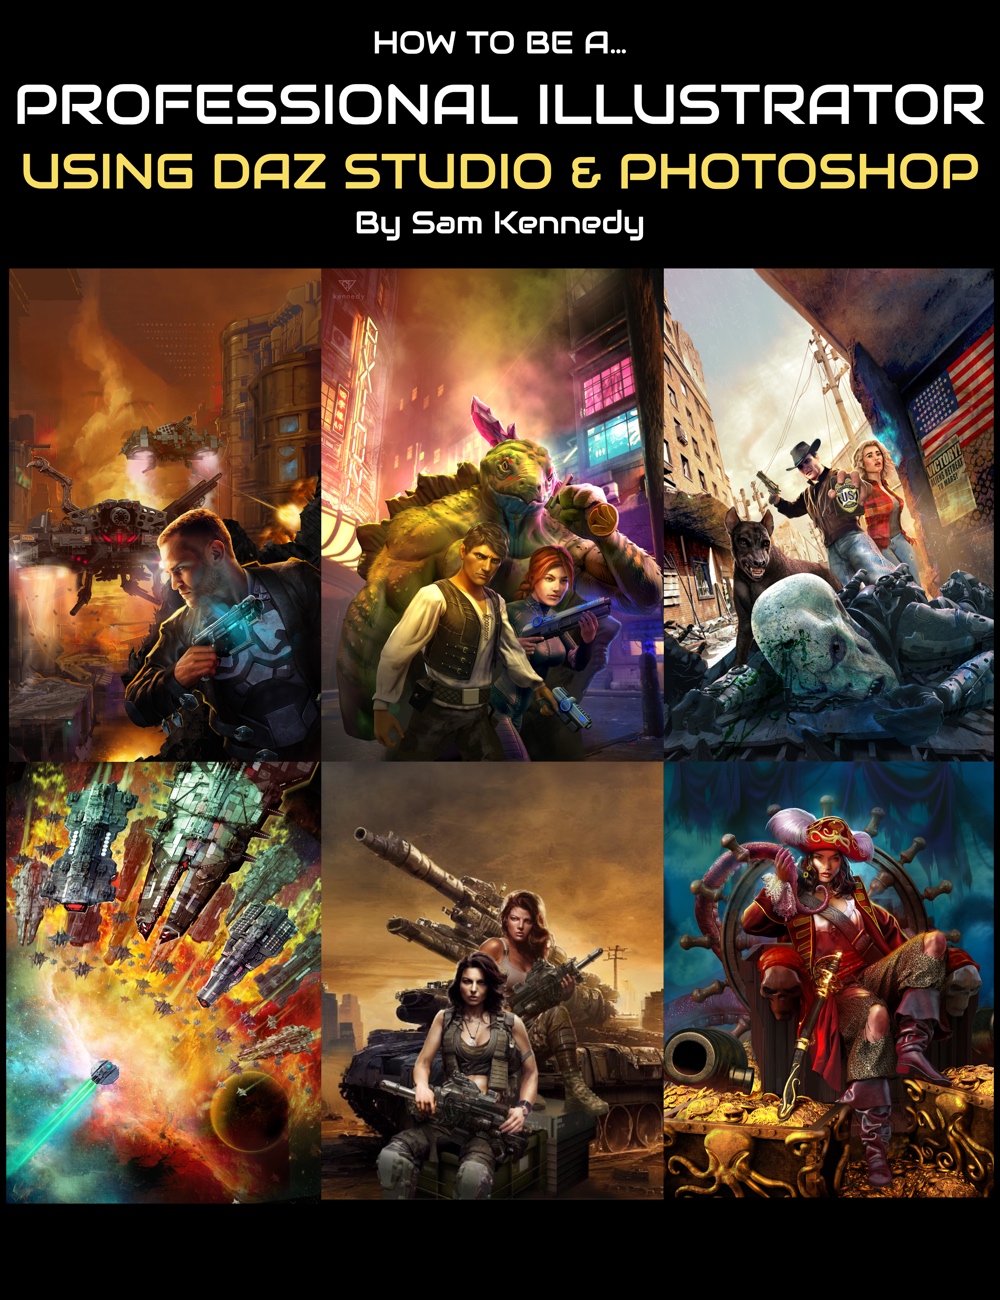 How to be a Professional Illustrator using DAZ Studio and Photoshop by: Digital Art Live, 3D Models by Daz 3D